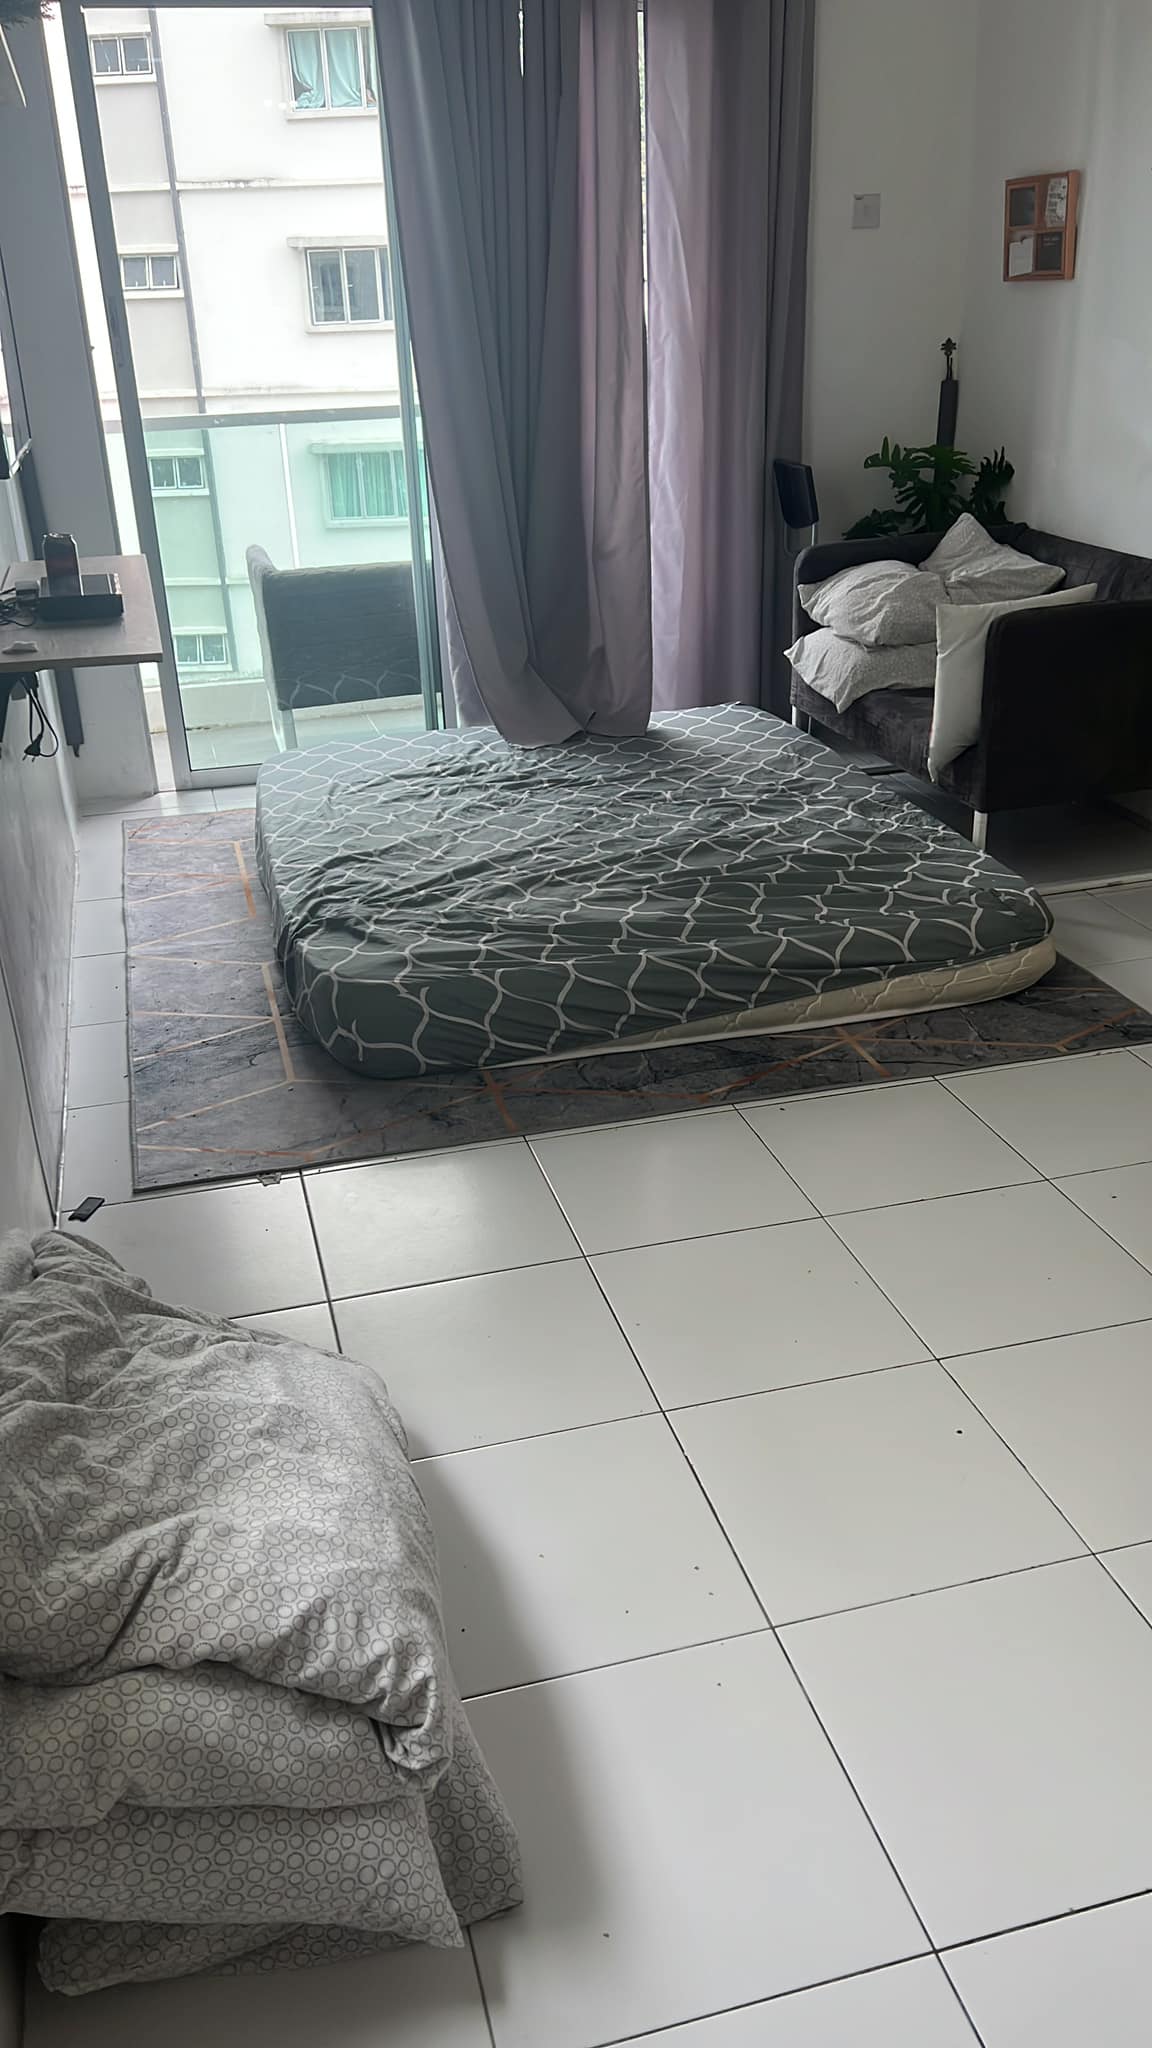 They even moved a mattress out from the bedroom into the living room. Image credit: Nur Izzati Nadia